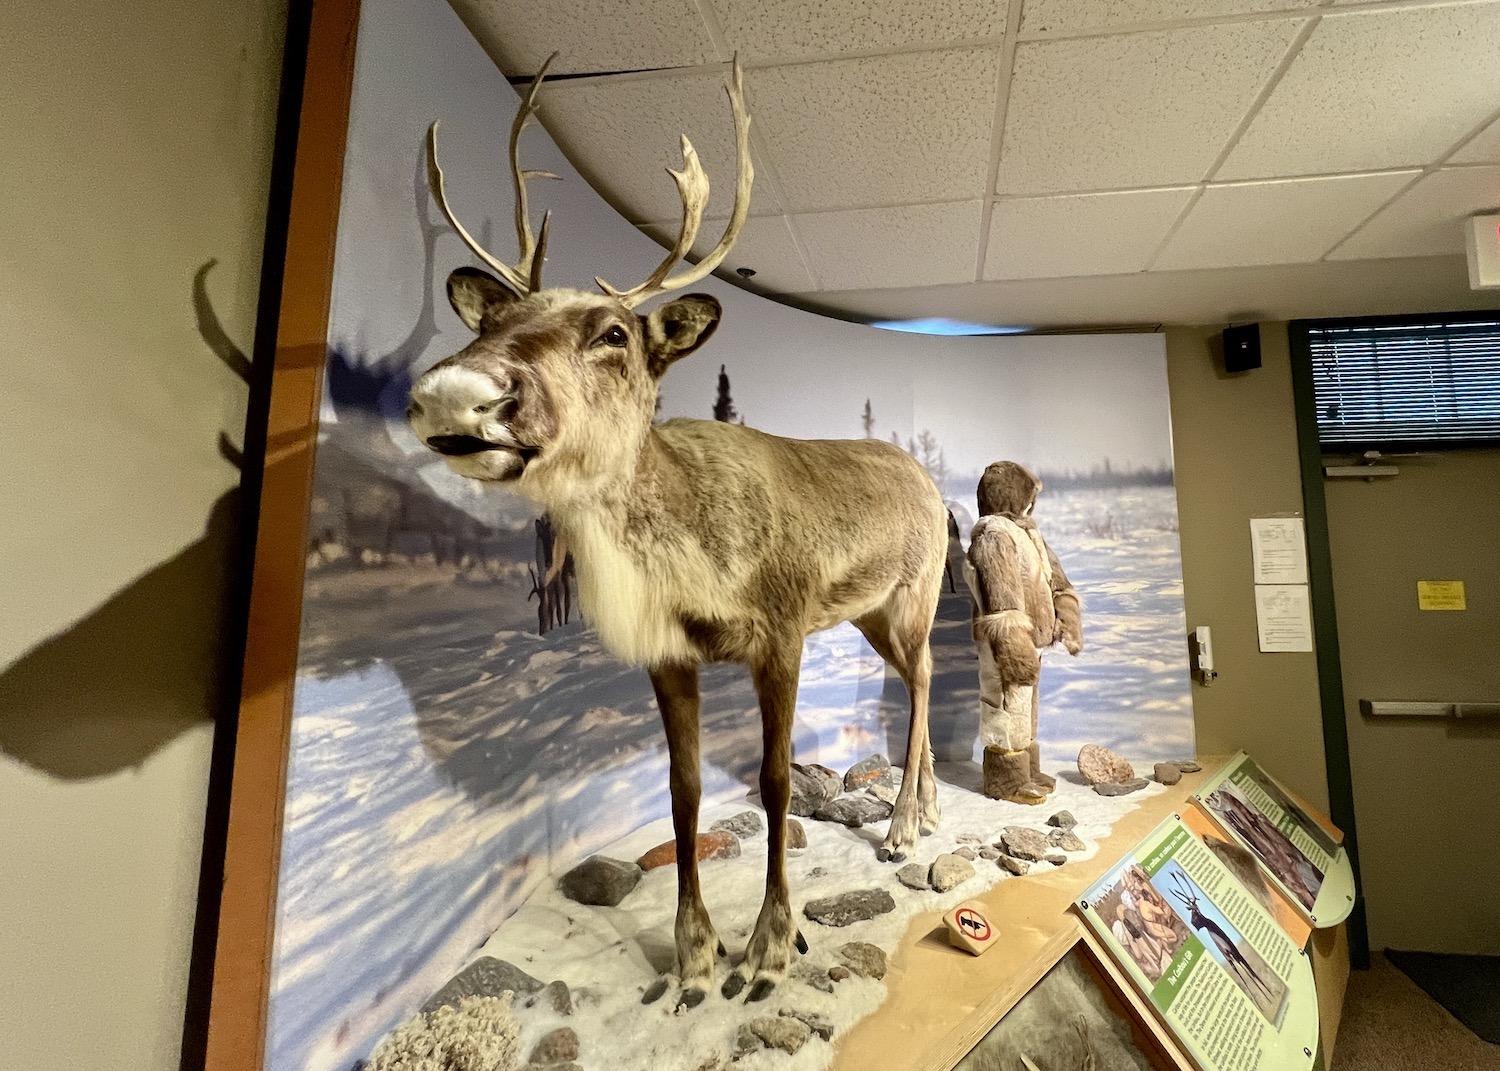 The caribou has long been used by Indigenous people for food, clothing and shelter.